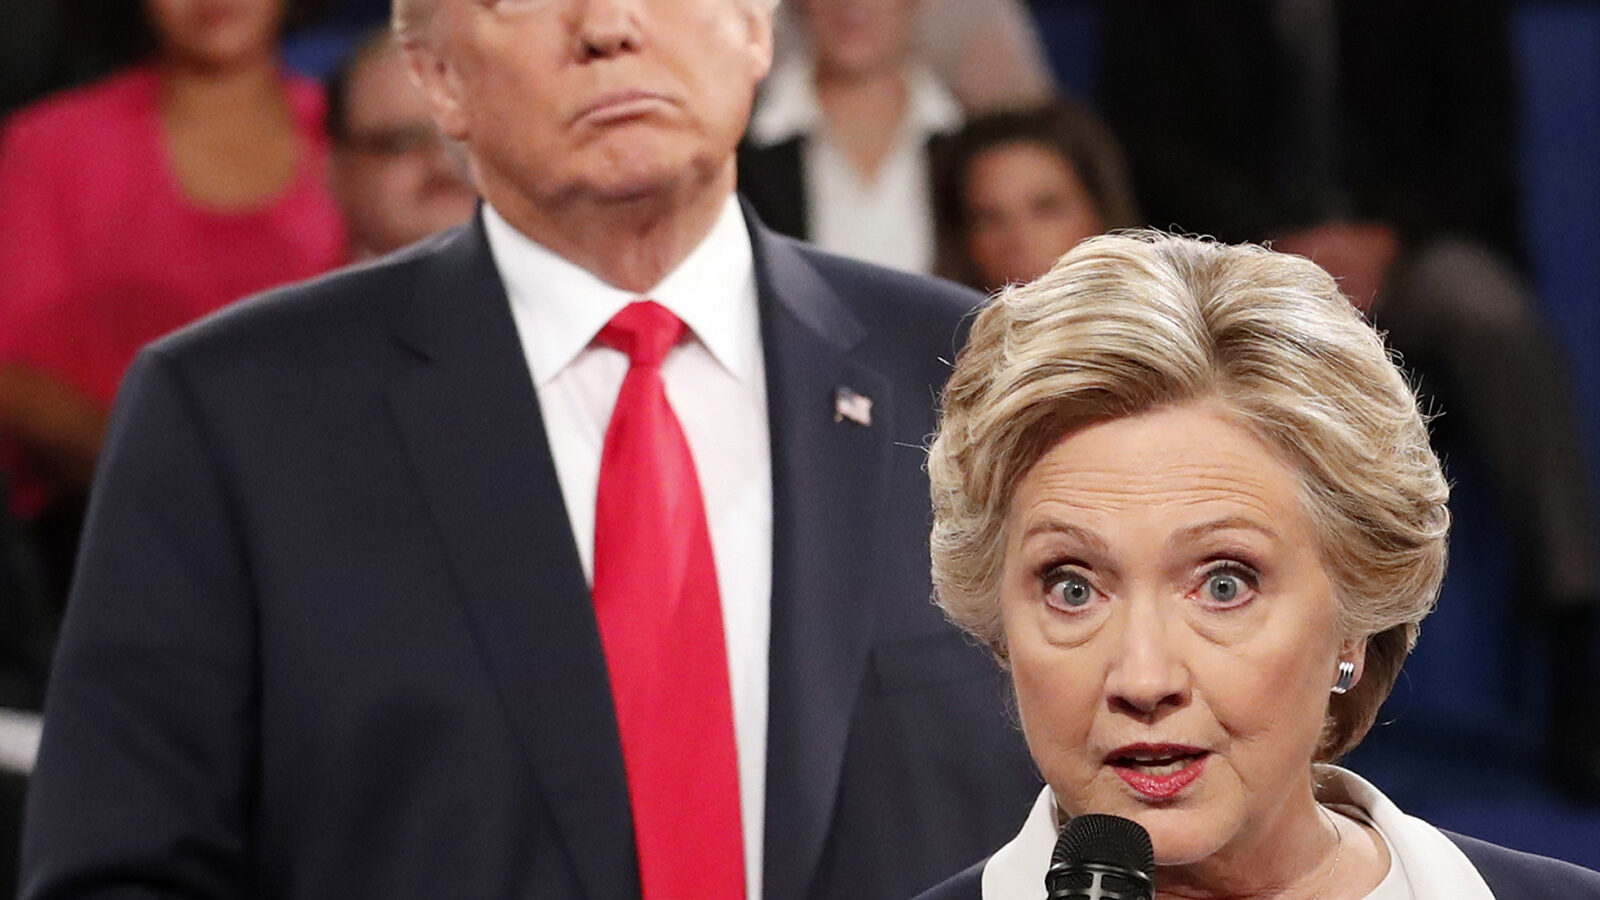 Democratic presidential nominee Hillary Clinton, right, speaks as Republican presidential nominee Donald Trump listens during the second presidential debate at Washington University in St. Louis, Sunday, Oct. 9, 2016.